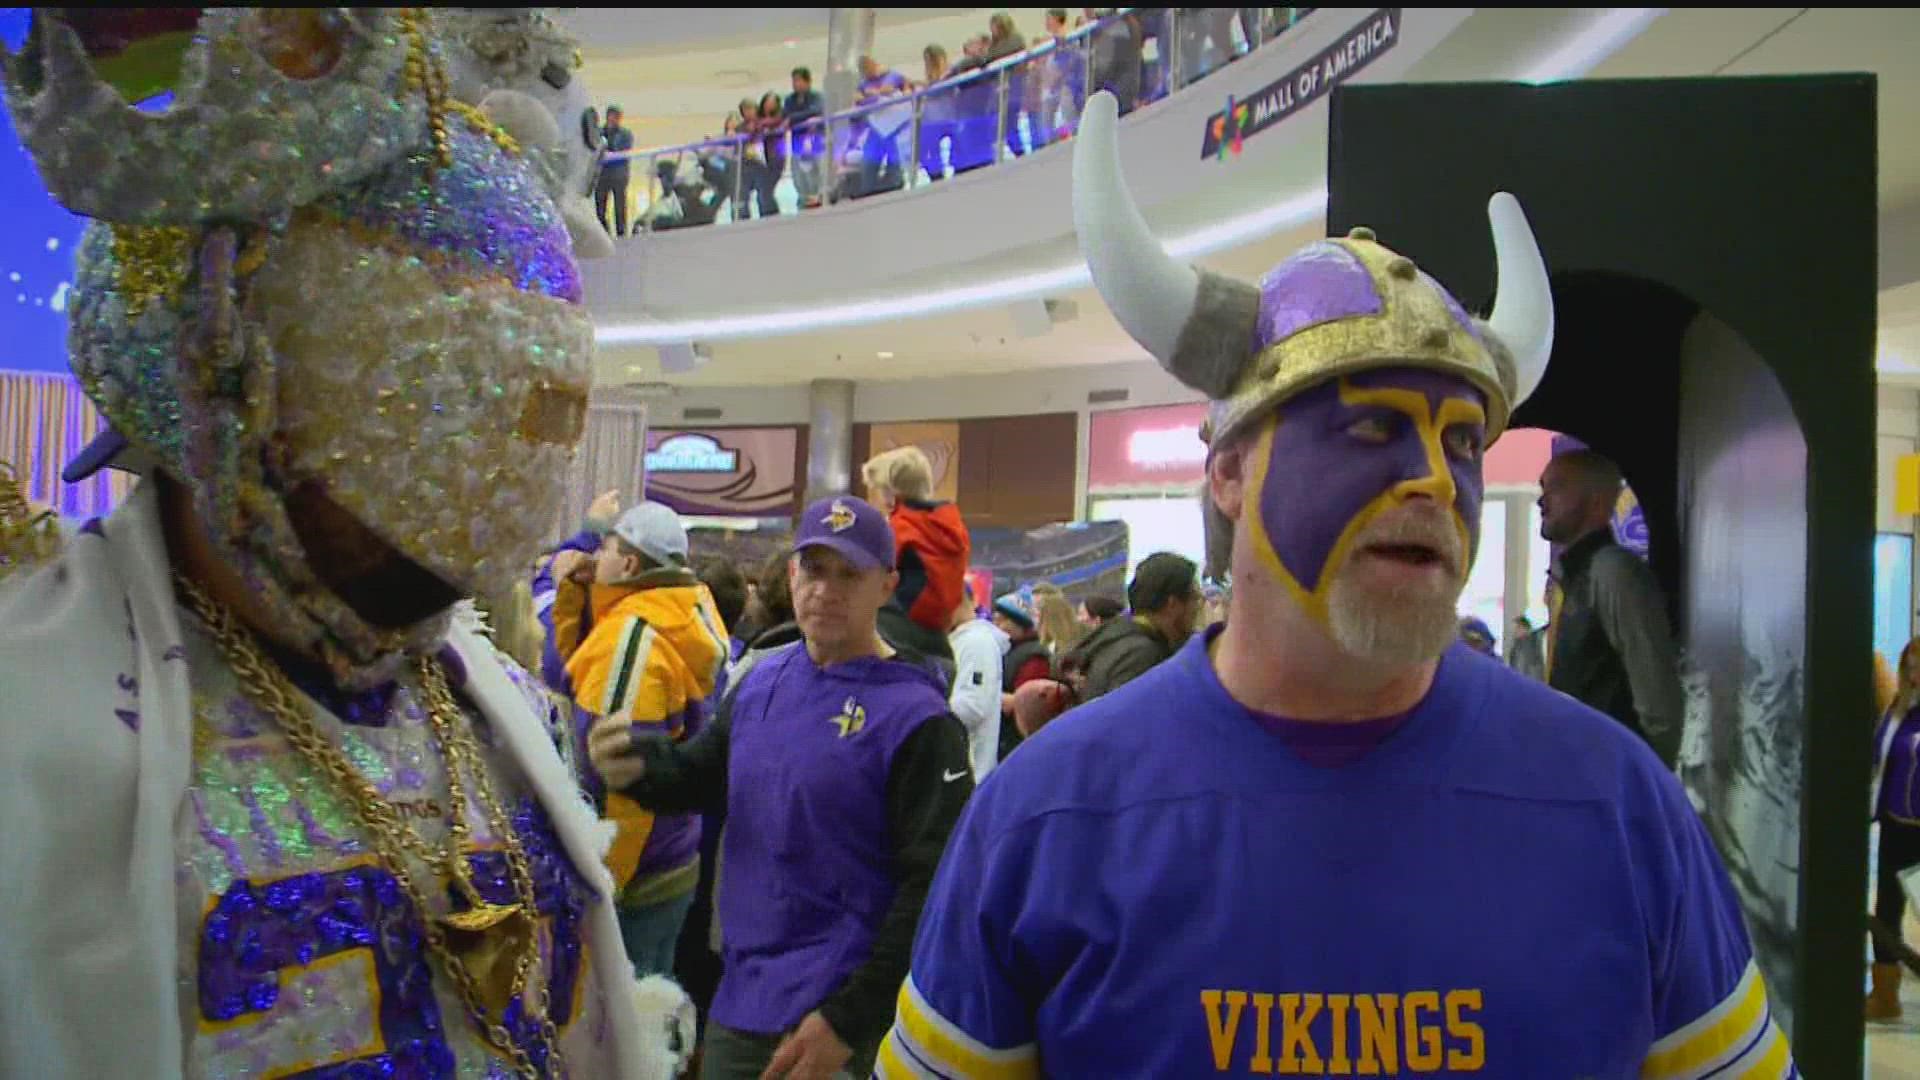 The Vikings haven't hosted a playoff game since the Minneapolis Miracle in January 2018.